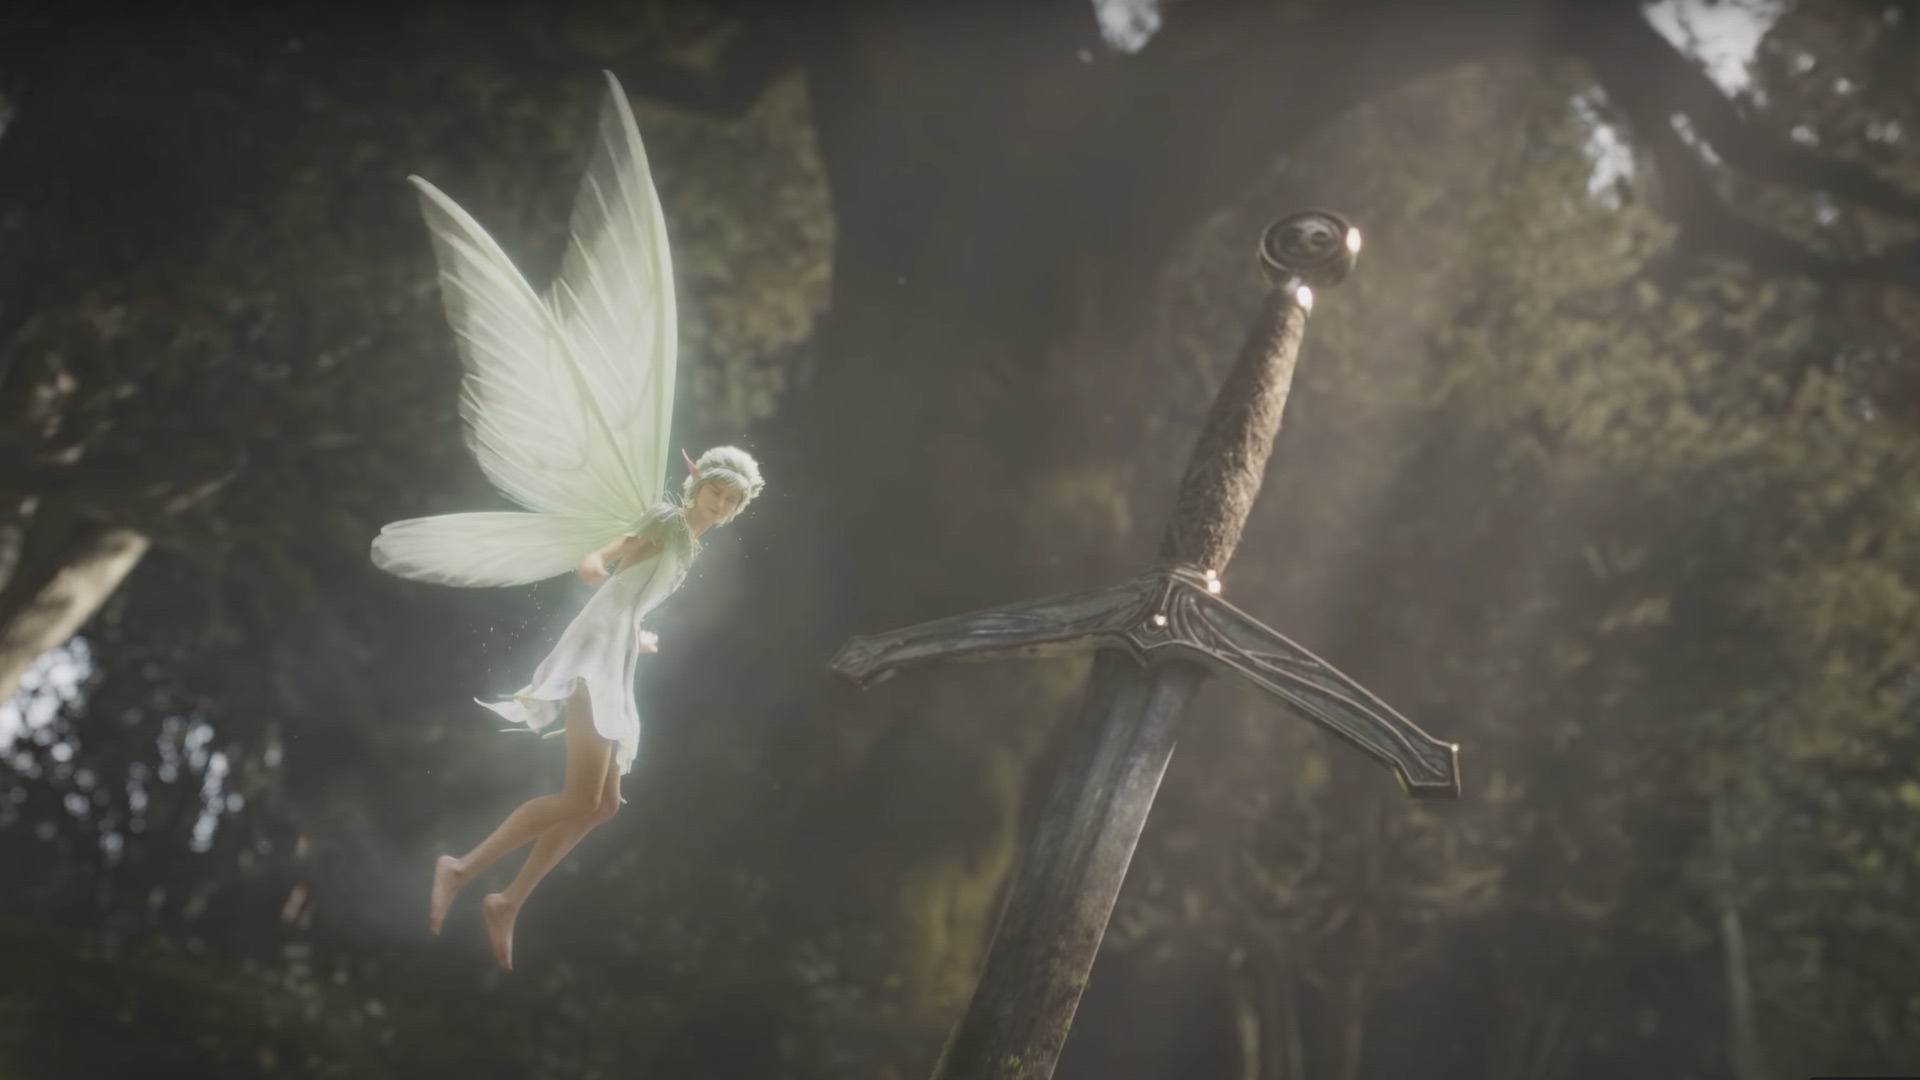 A flying fairy next to the hilt of a sword